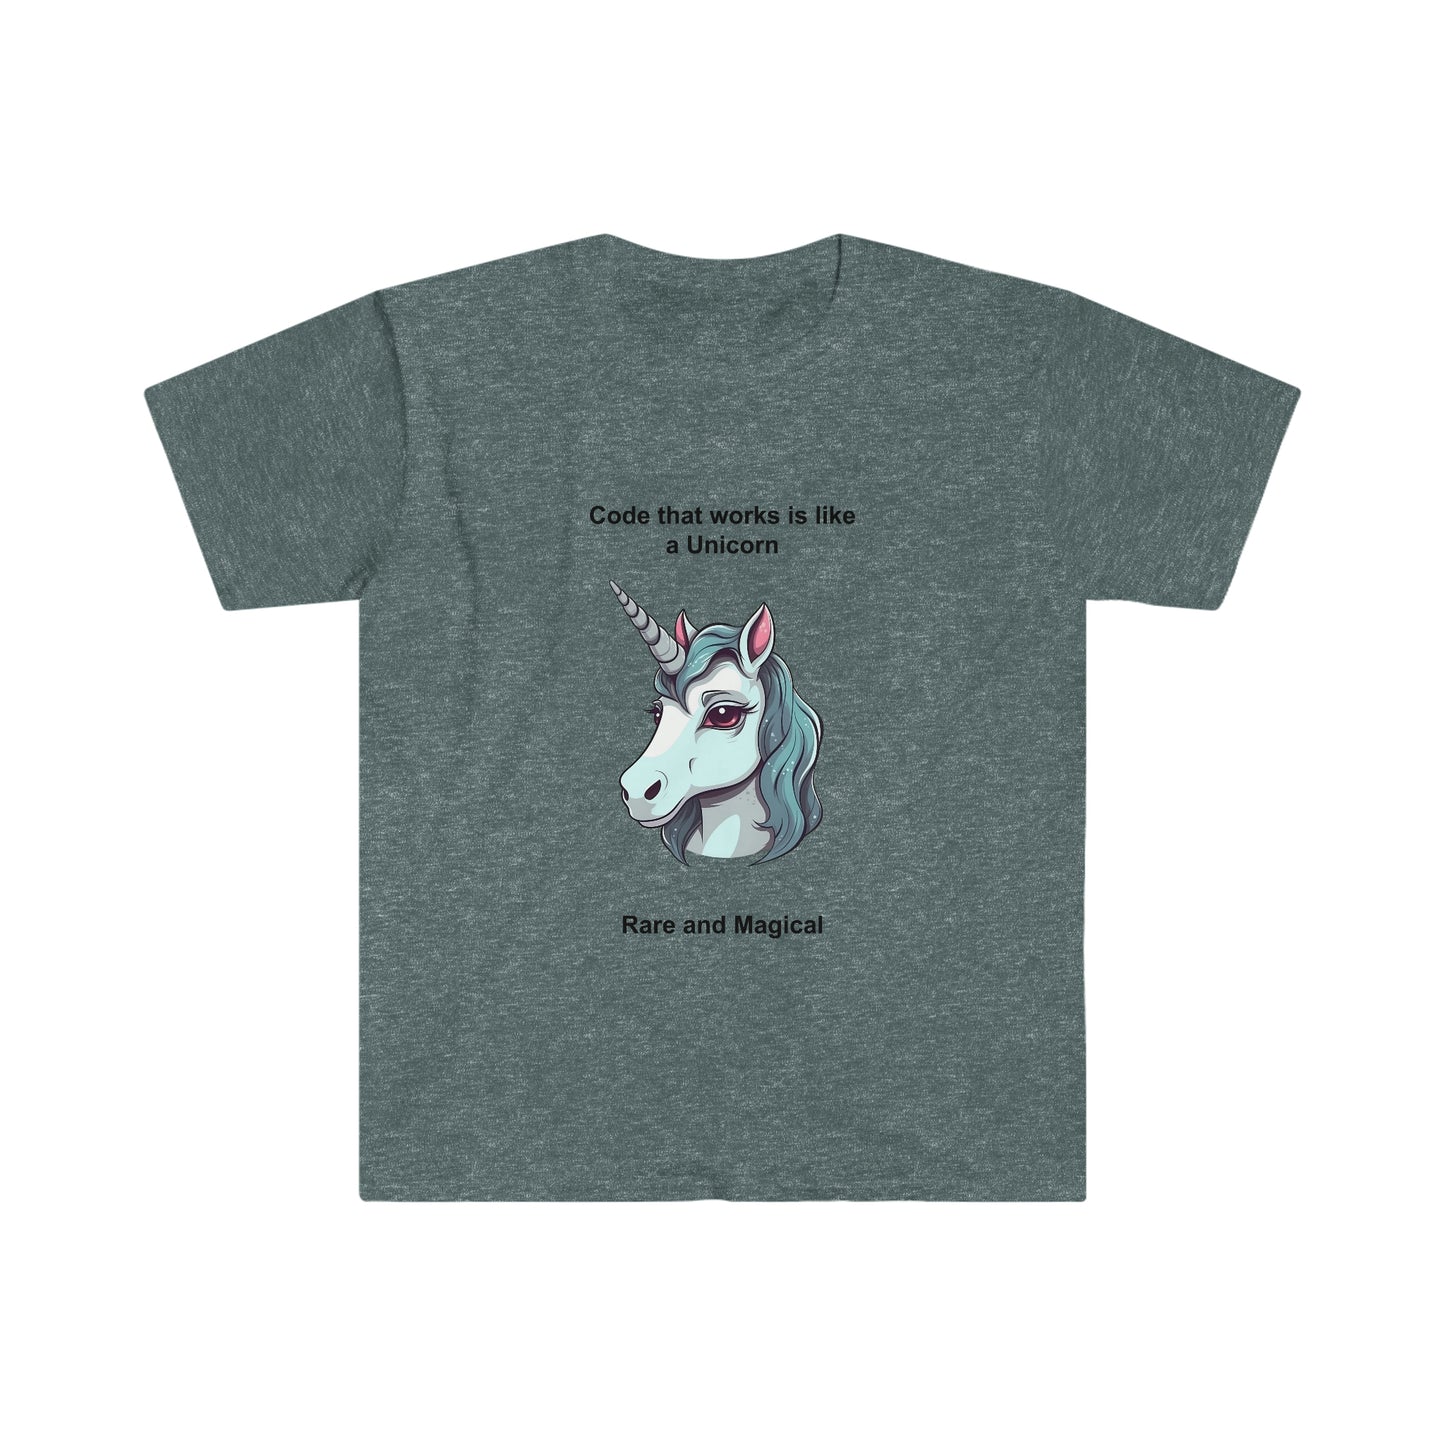 Programmer T-Shirt with Inspiring Quote "Code that works is like a Unicorn: Rare and Magical" to Boost Motivation and Creativity